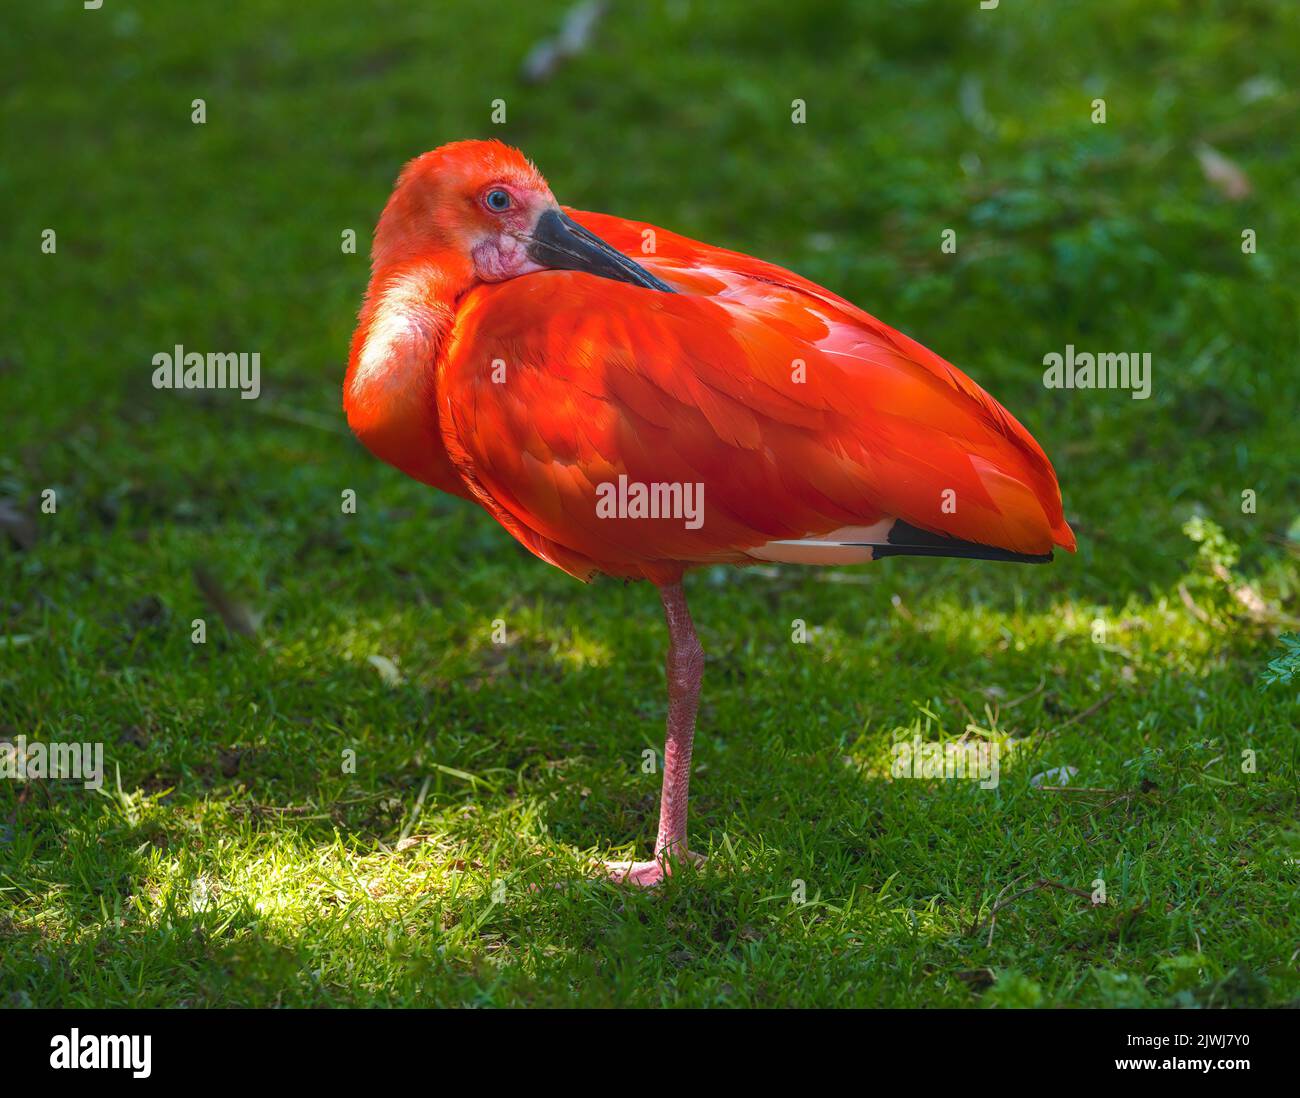 Red Scarlet Ibis (Eudocimus ruber) standing in the grass Stock Photo